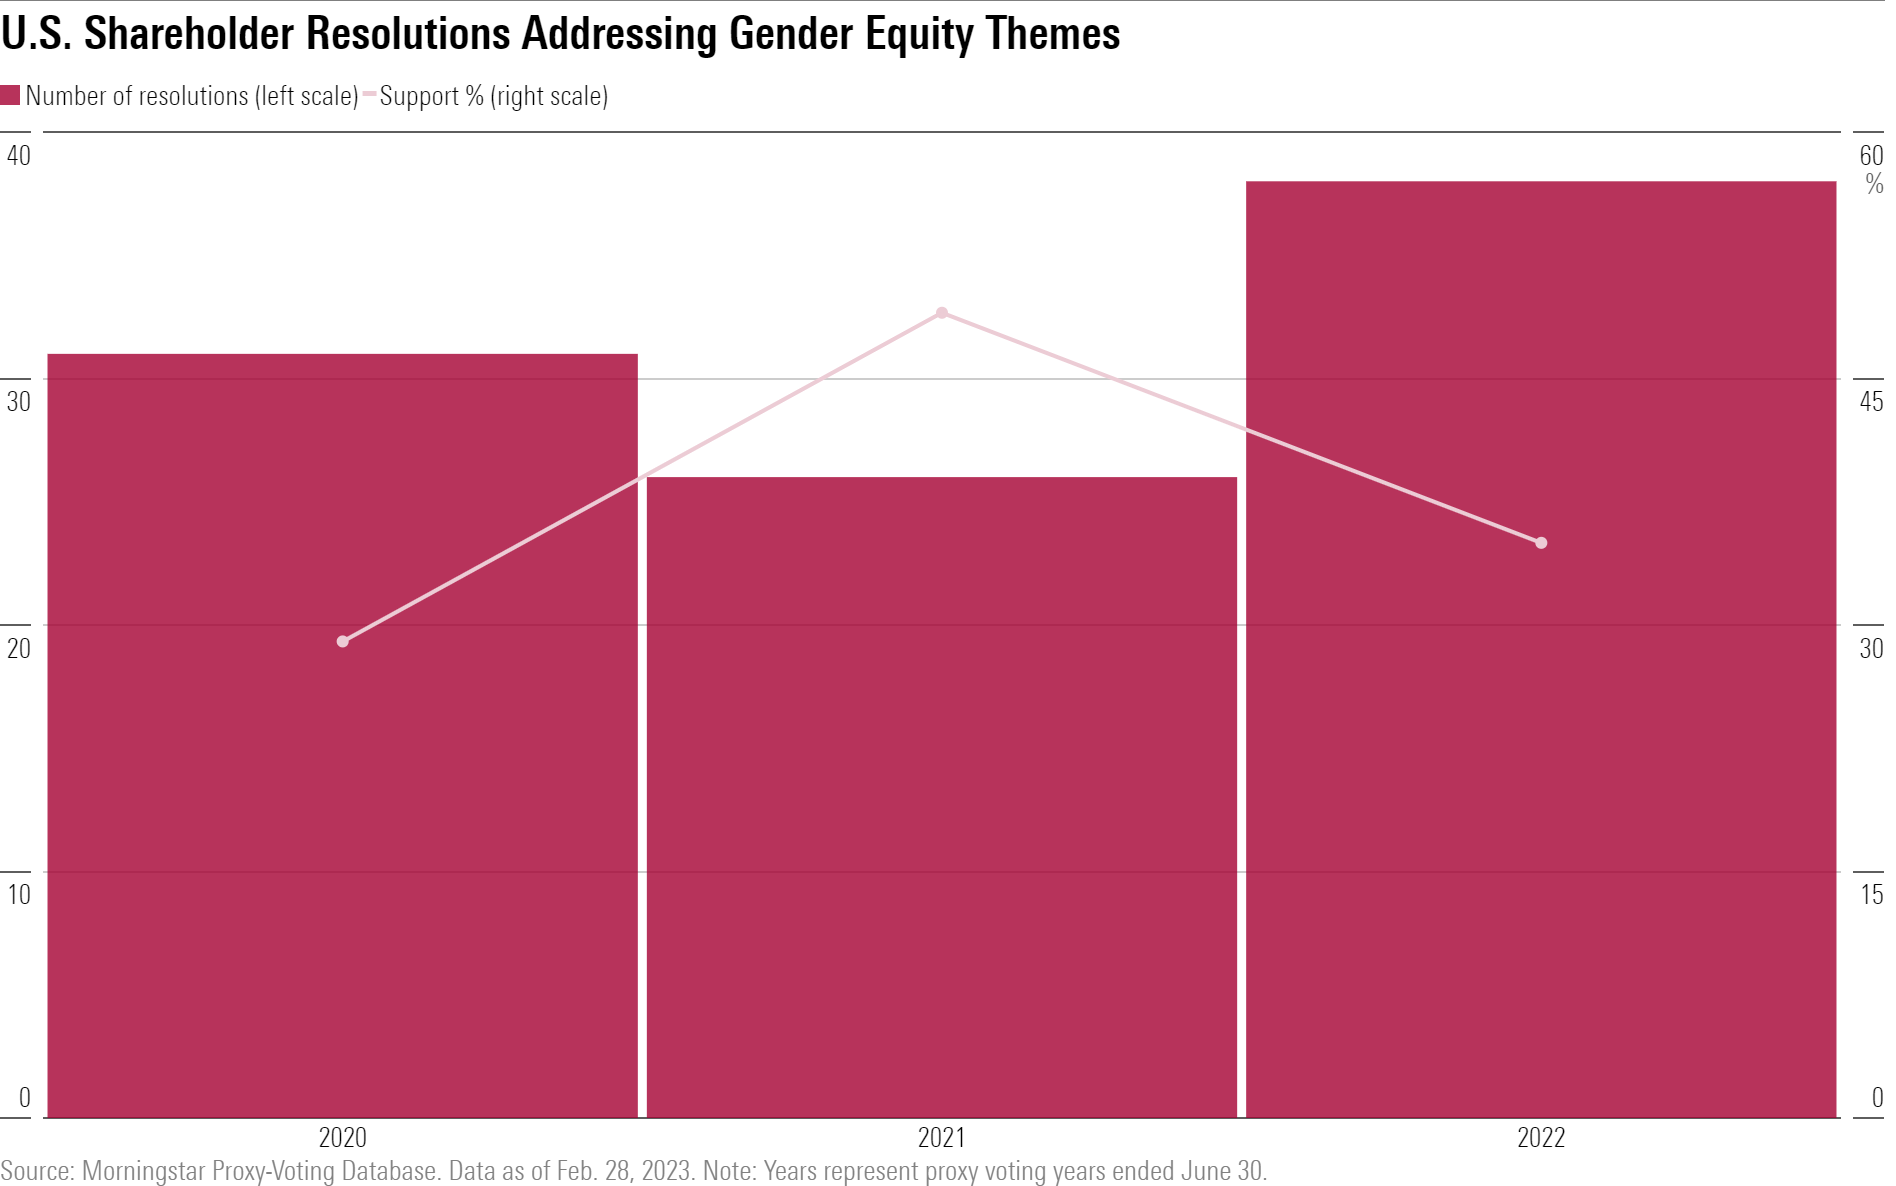 Chart showing the number of, and level of support for, shareholder resolutions on gender equity themes at U.S. companies over three years. There were 38 shareholder resolutions at U.S. companies in 2022 that addressed gender equity themes; a significant-year on-year increase.